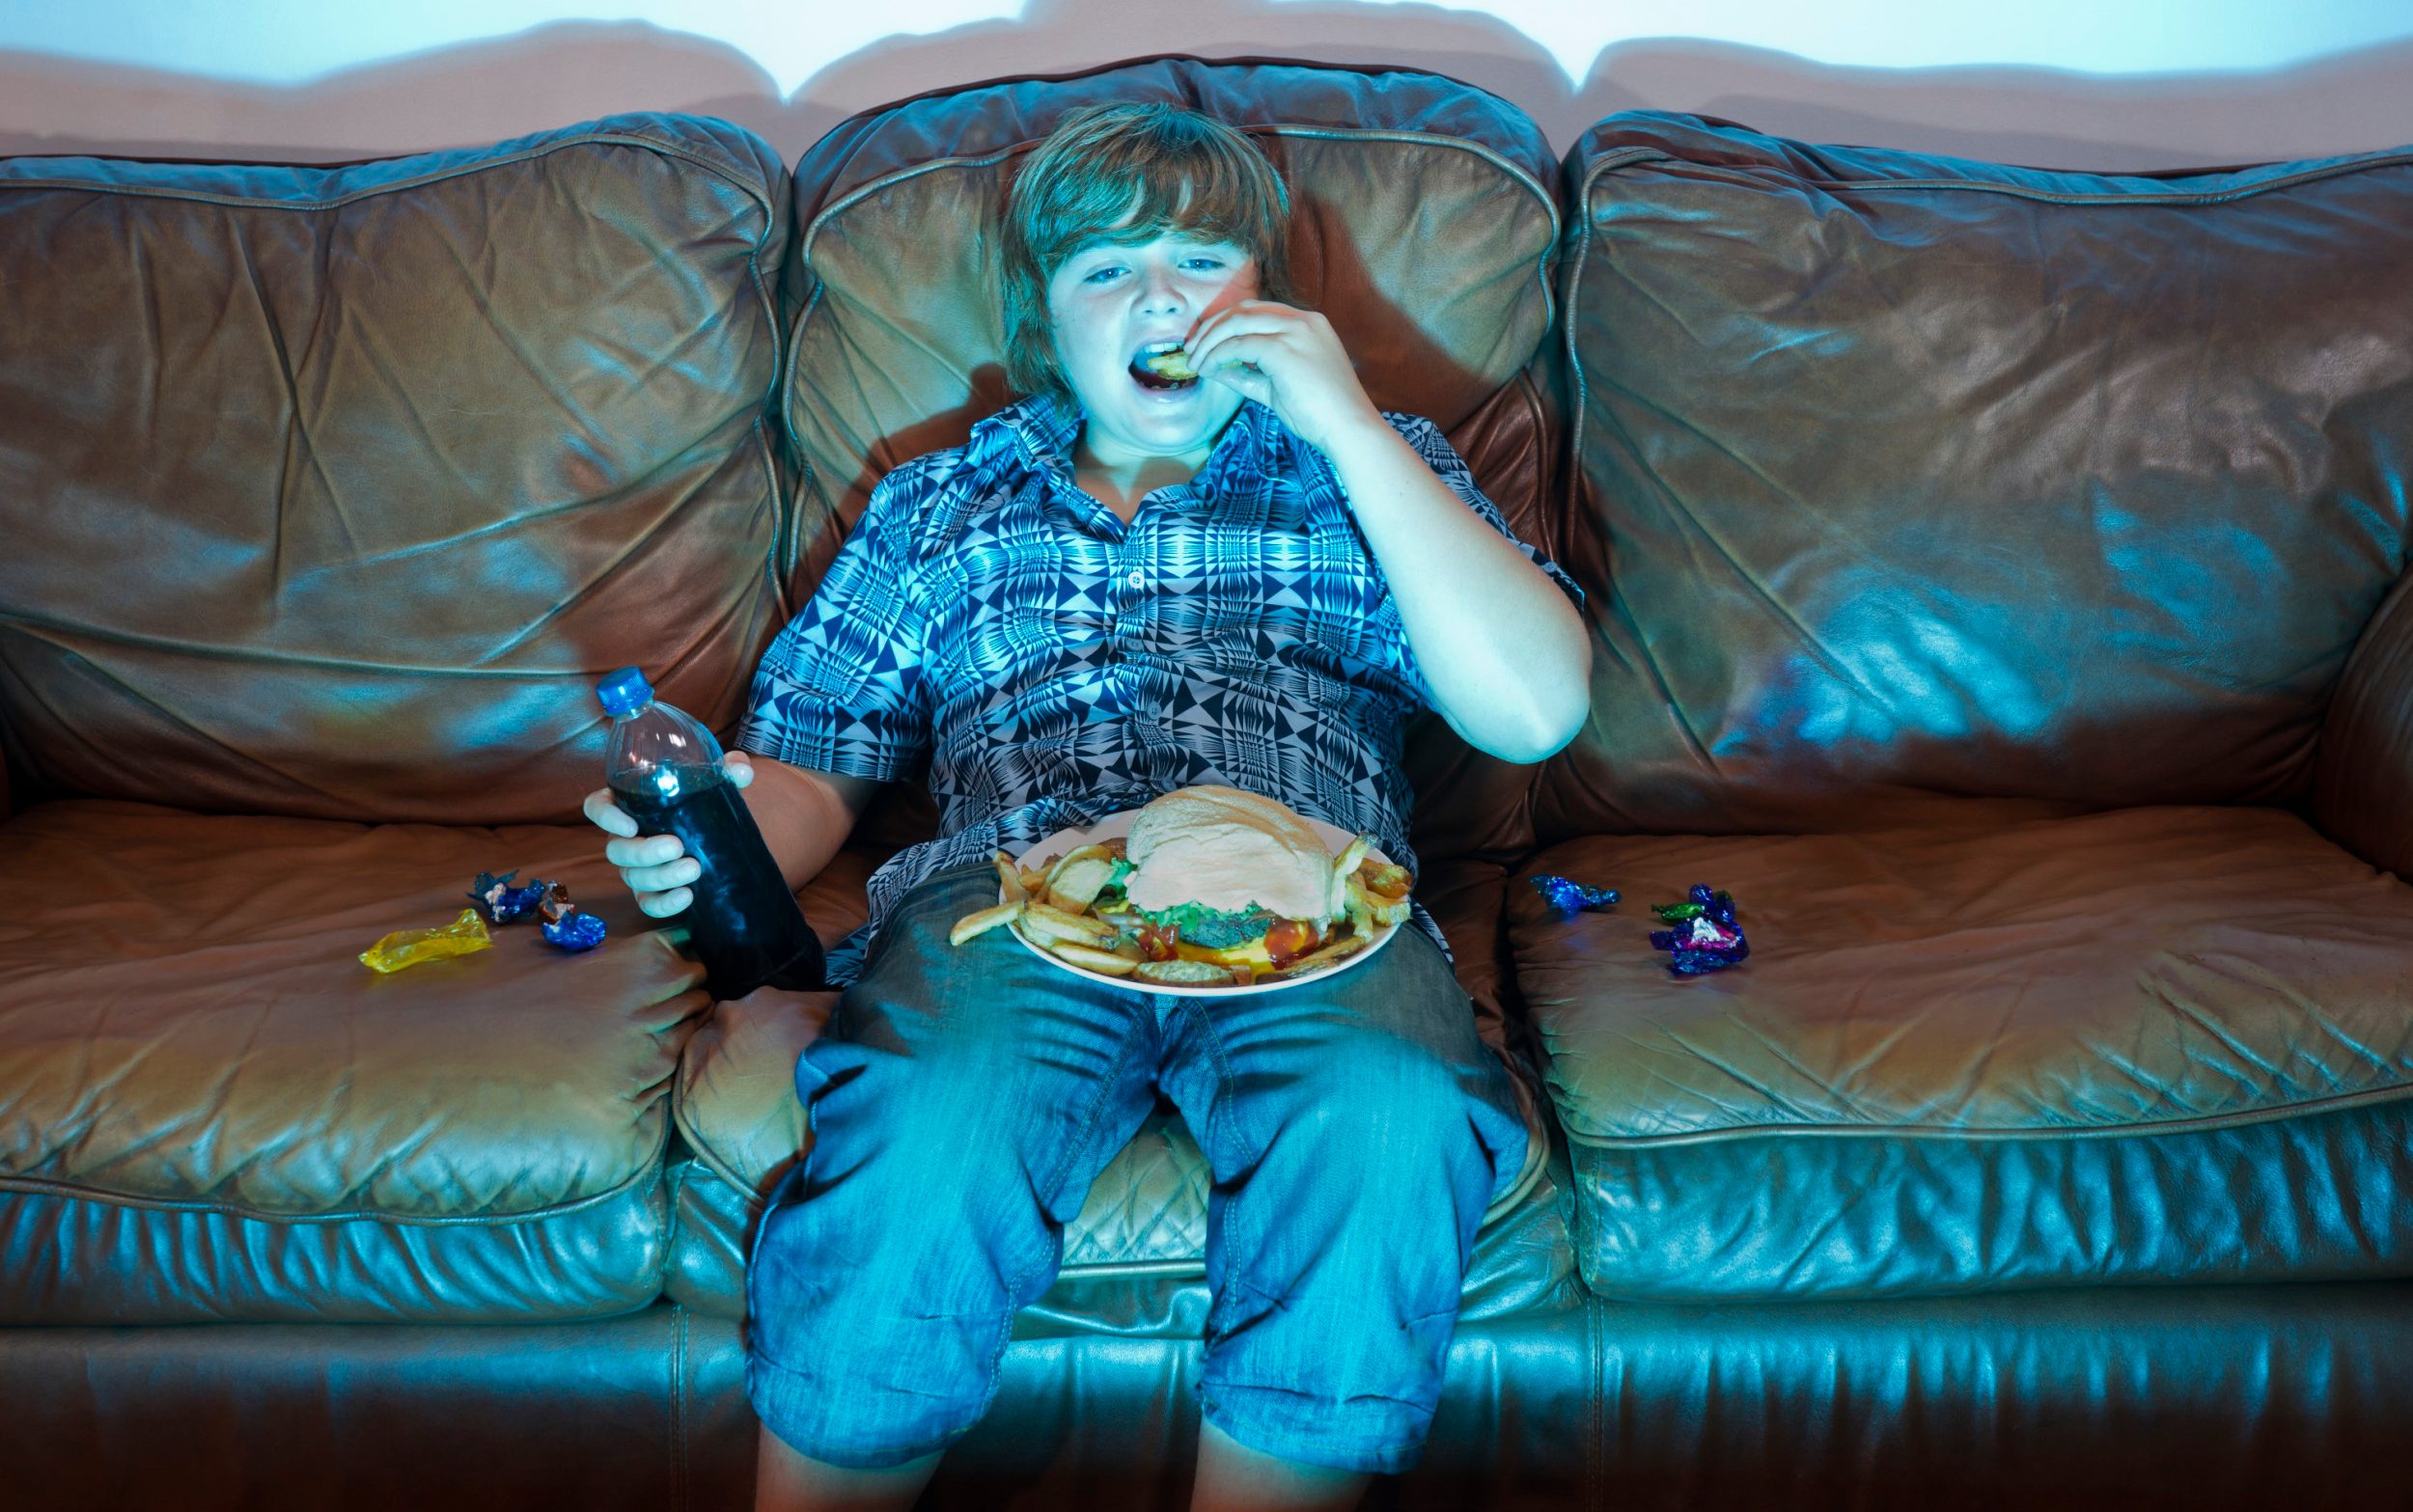 couch potato children more likely to suffer premature heart damage